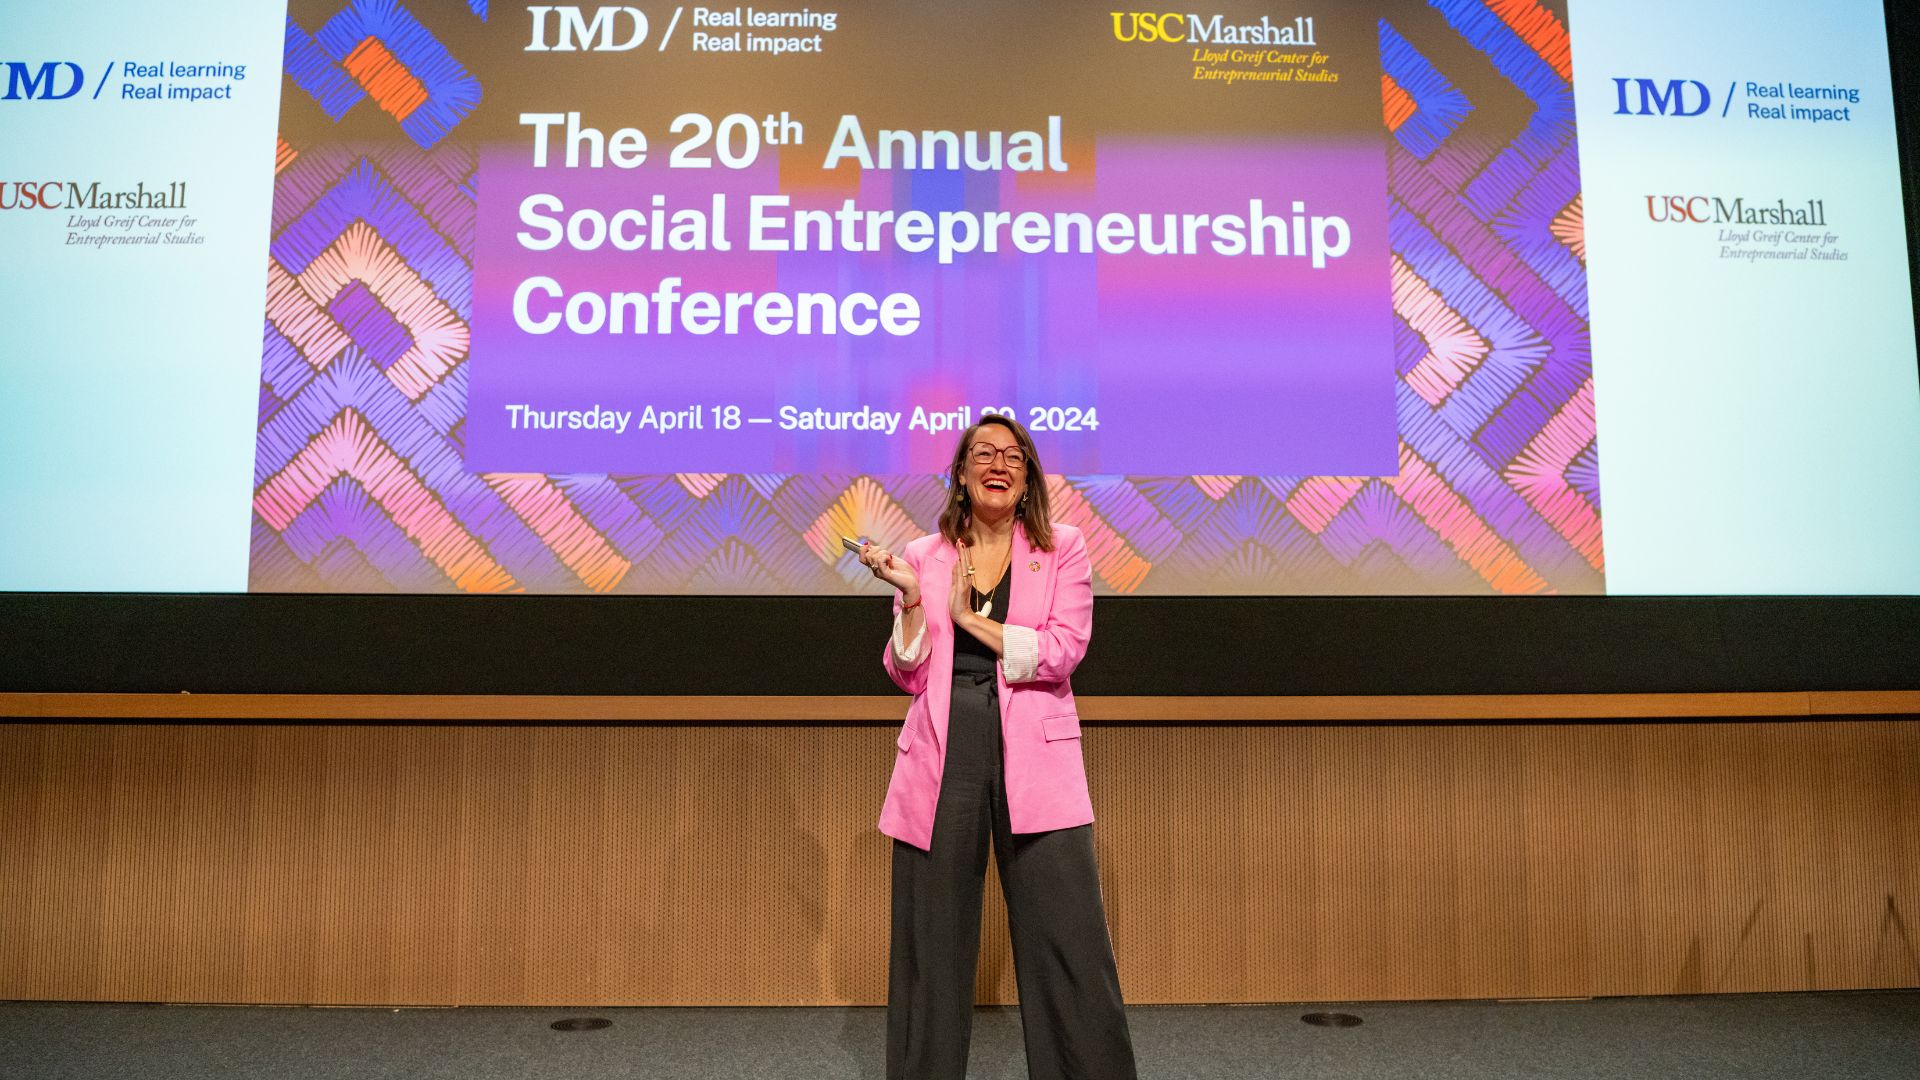 Sophie Bacq speaks at the 20th Annual Social Entrepreneurship Conference - IMD Business School